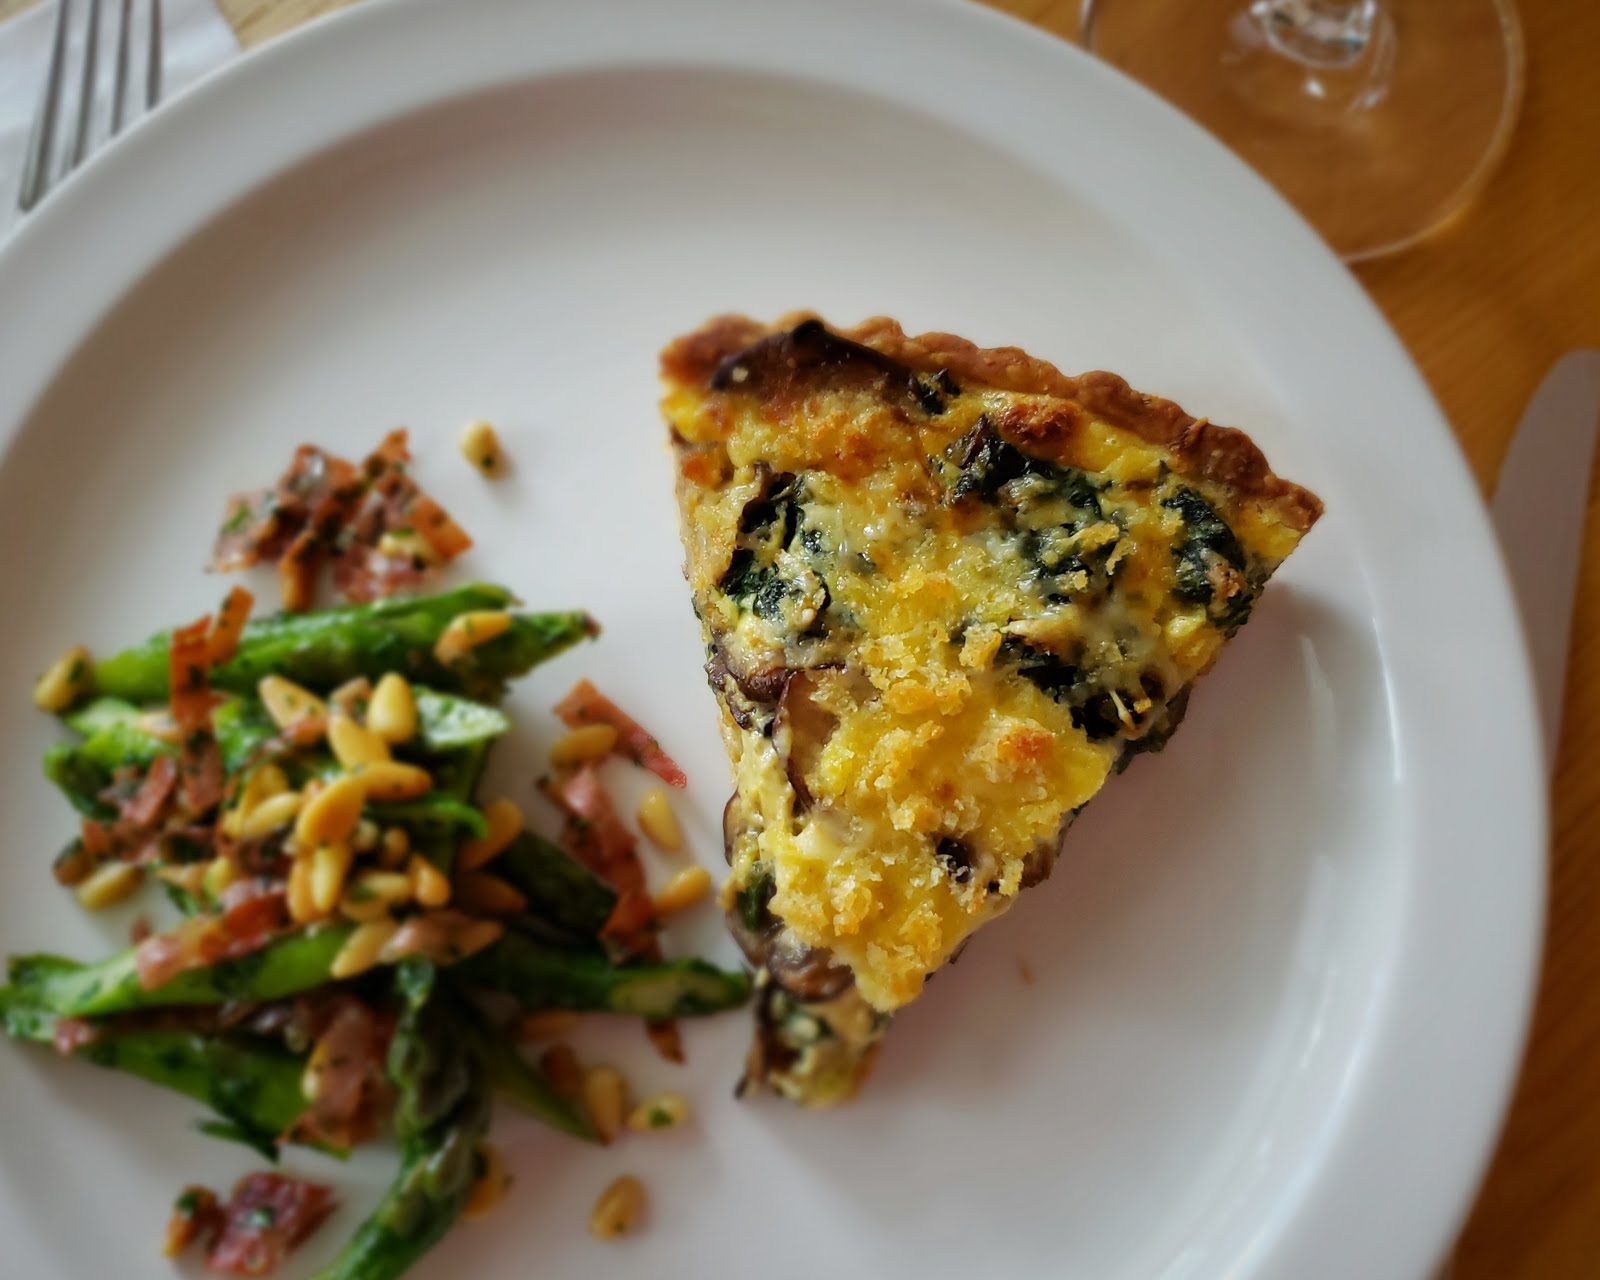 For Love of the Table: Savory Beet Greens & Mushroom Quiche...two ways...